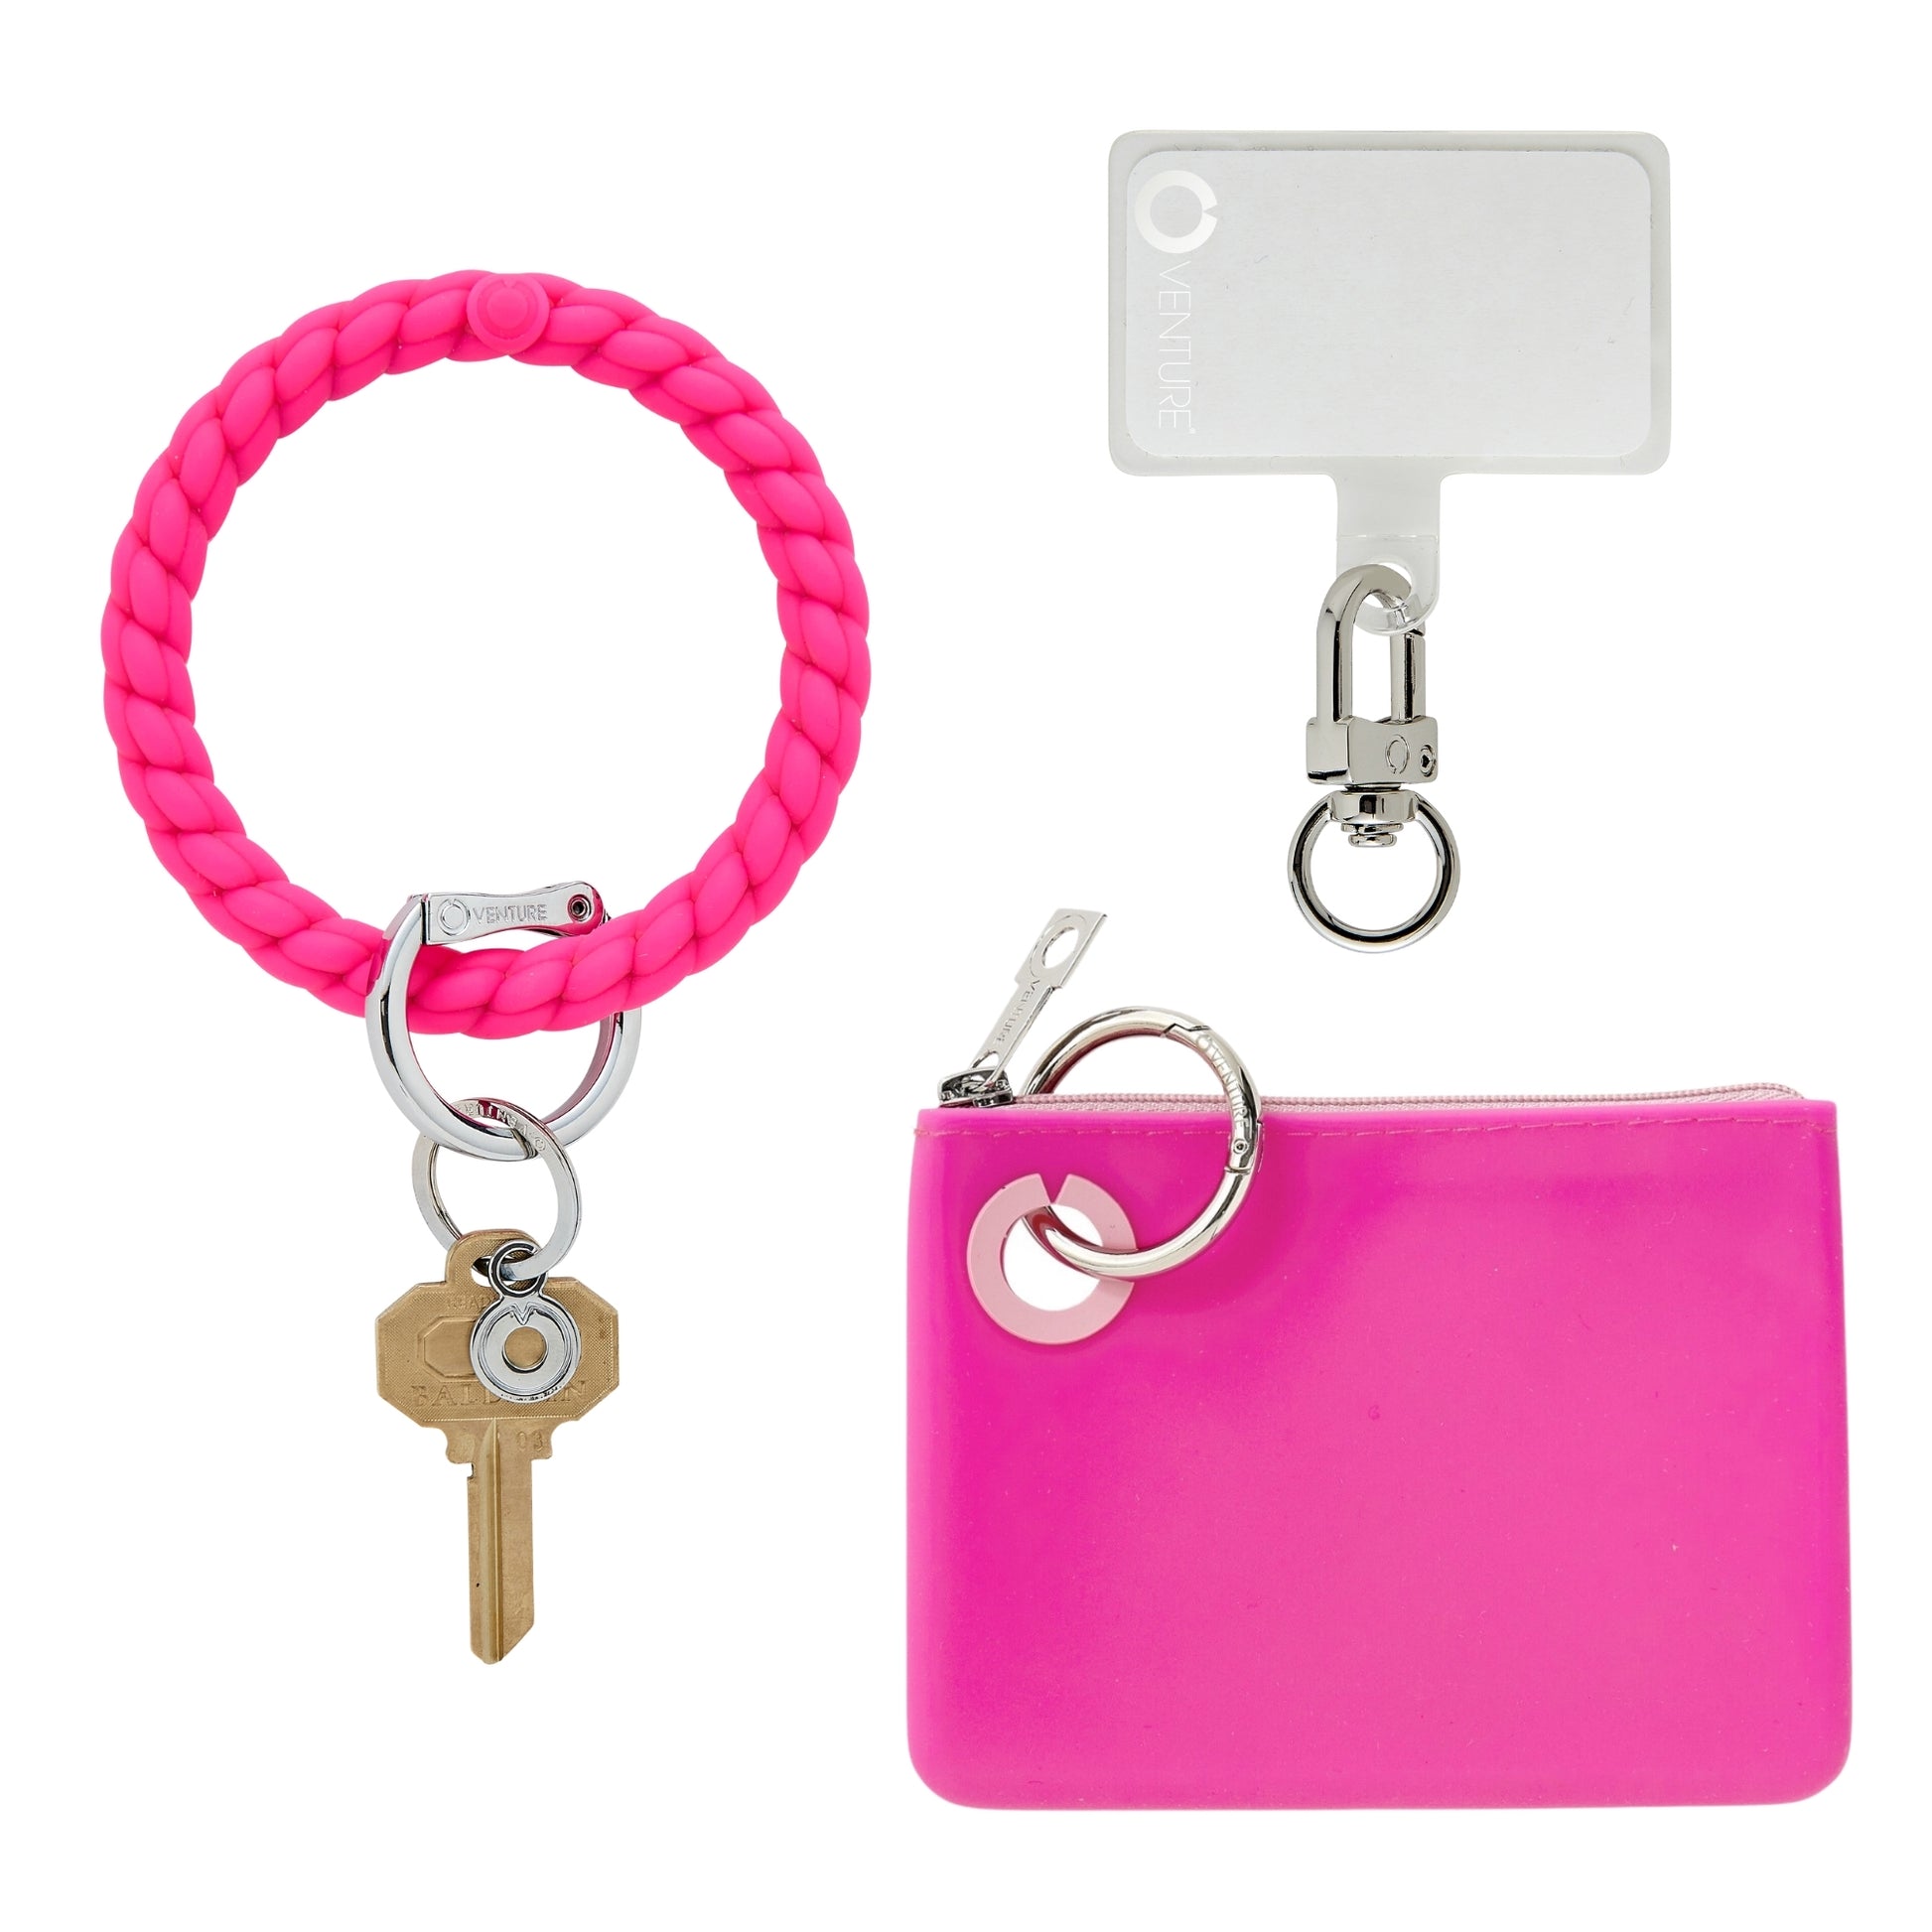 Tickled pink silicone set with mini silicone pouch in tickled pink and phone connector